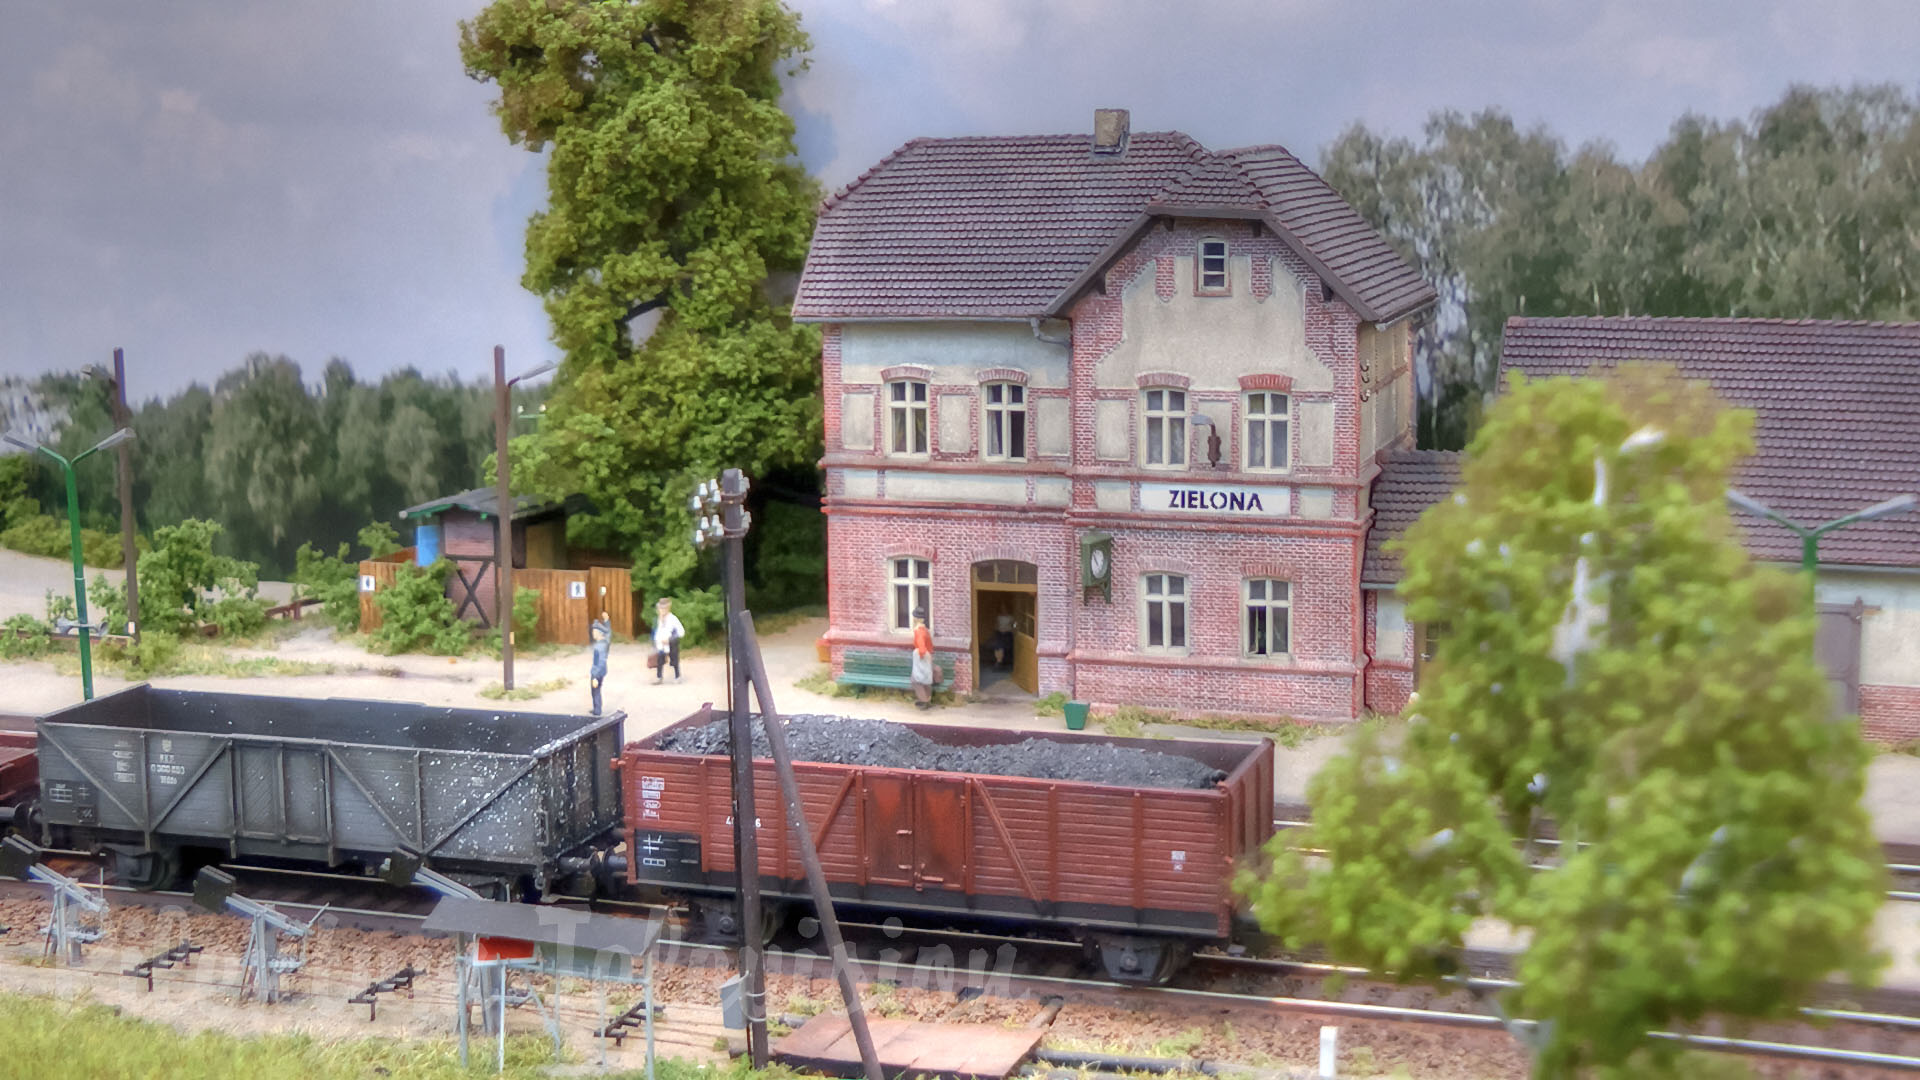 Model railroad layout of Zielona railway station with steam locomotives of the Polish State Railways